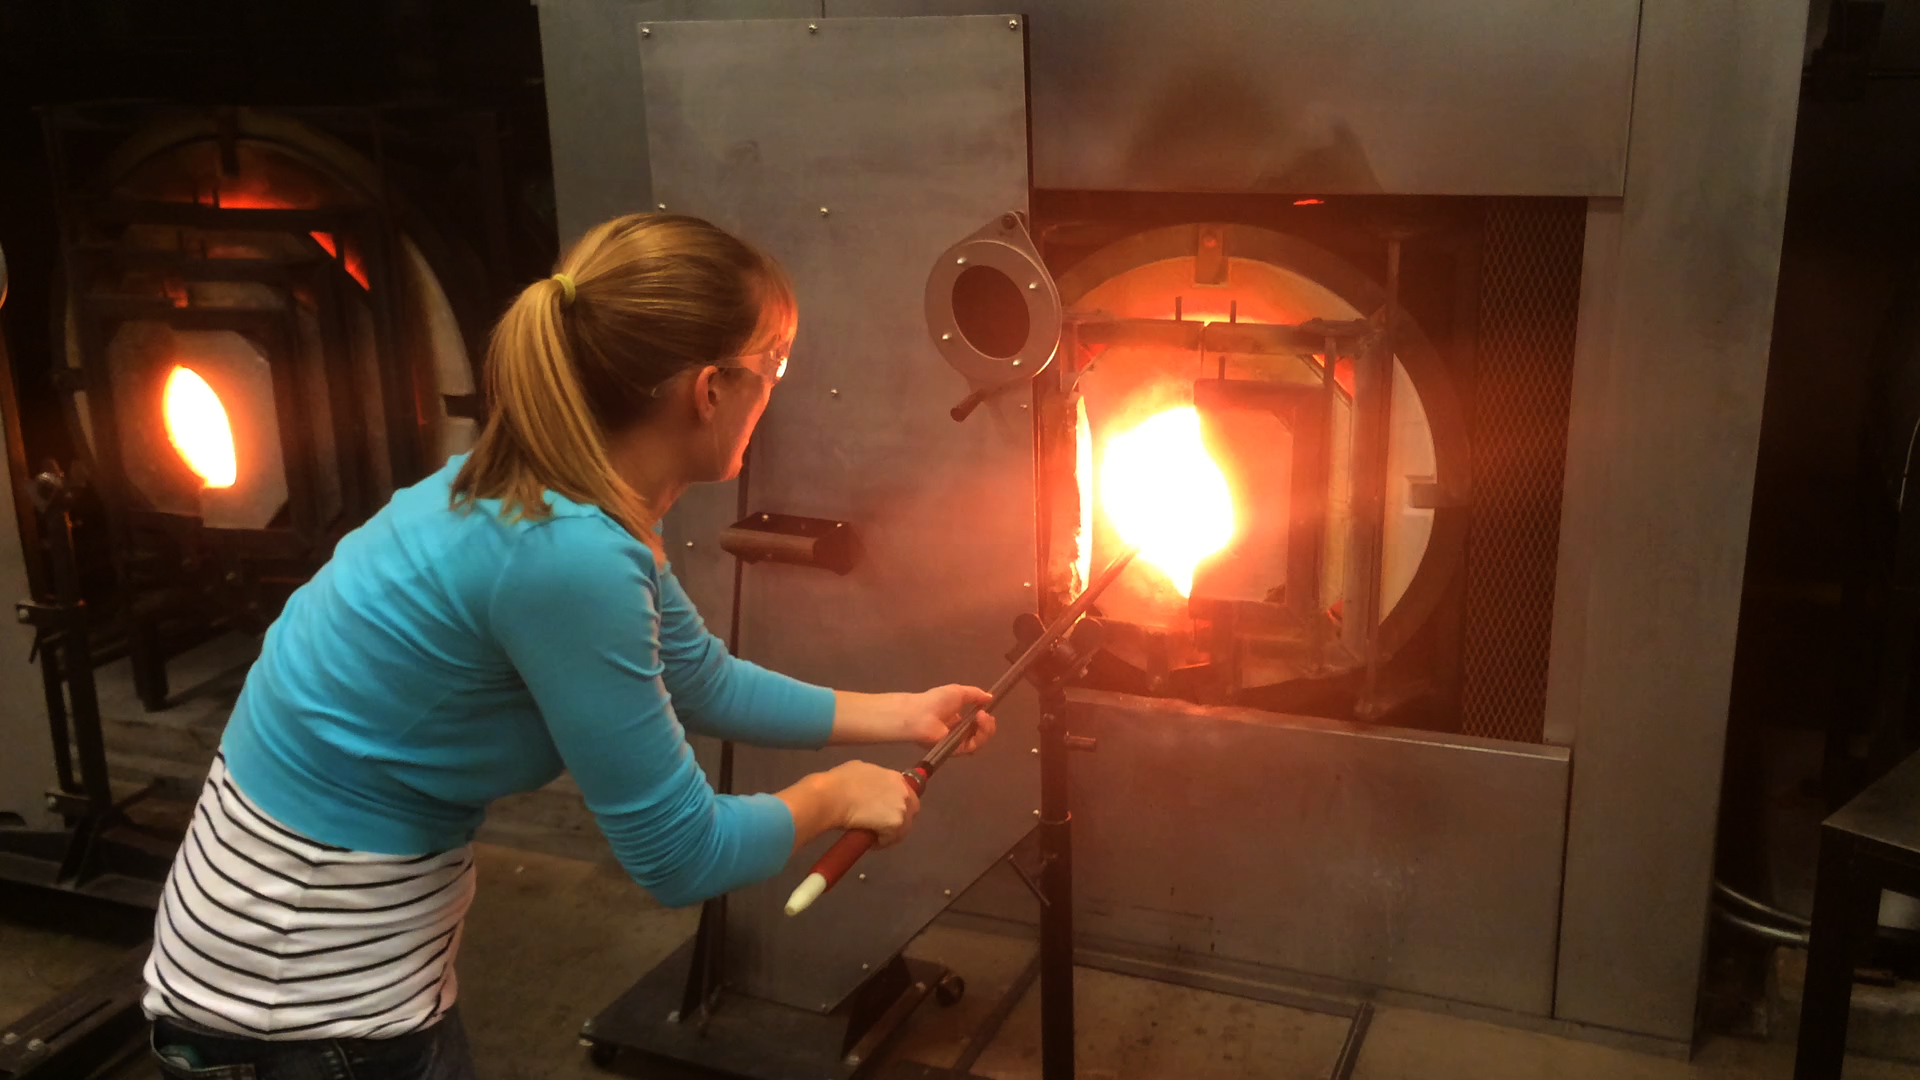 Writer Susannah Skiver Barton heats up a glass win the furnace at Brooklyn's Urban Glass on November 2, 2015. Photo ©2015 by Mark Gillespie.